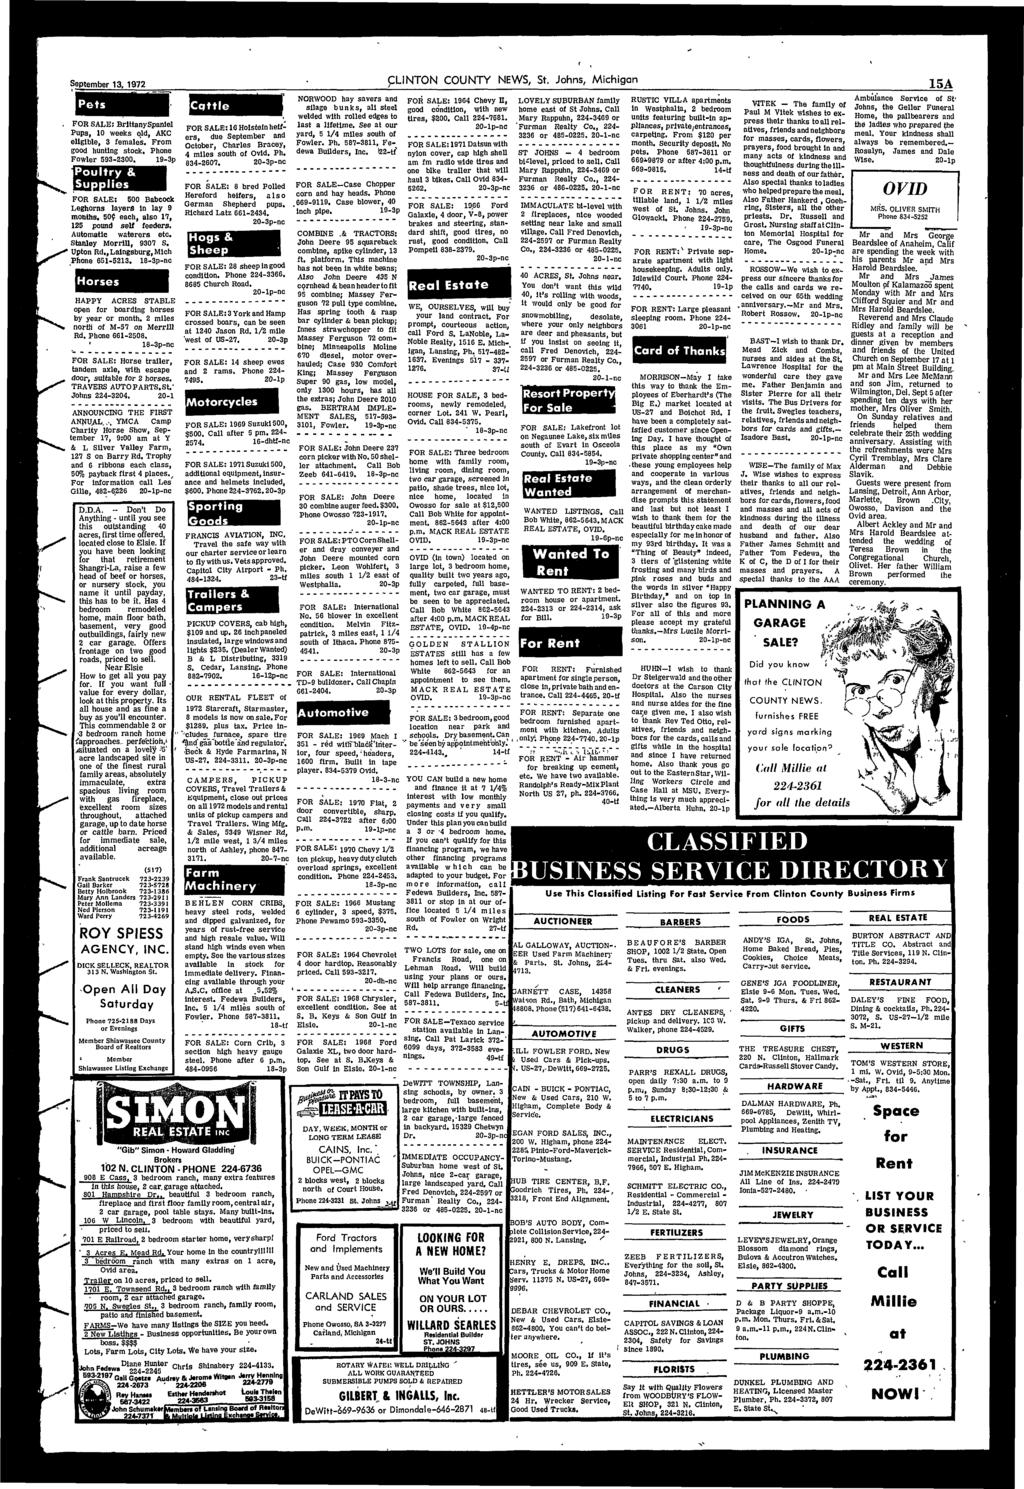 September 13, 1972 plinton COUNTY NEWS, St, Johns, Michigan 15A Pets FOR SALE: Brittany Spaniel Pups, 10 weeks old, AKC eligible, 3 females. From good hunting stock. Phone Fowler 593-2300.